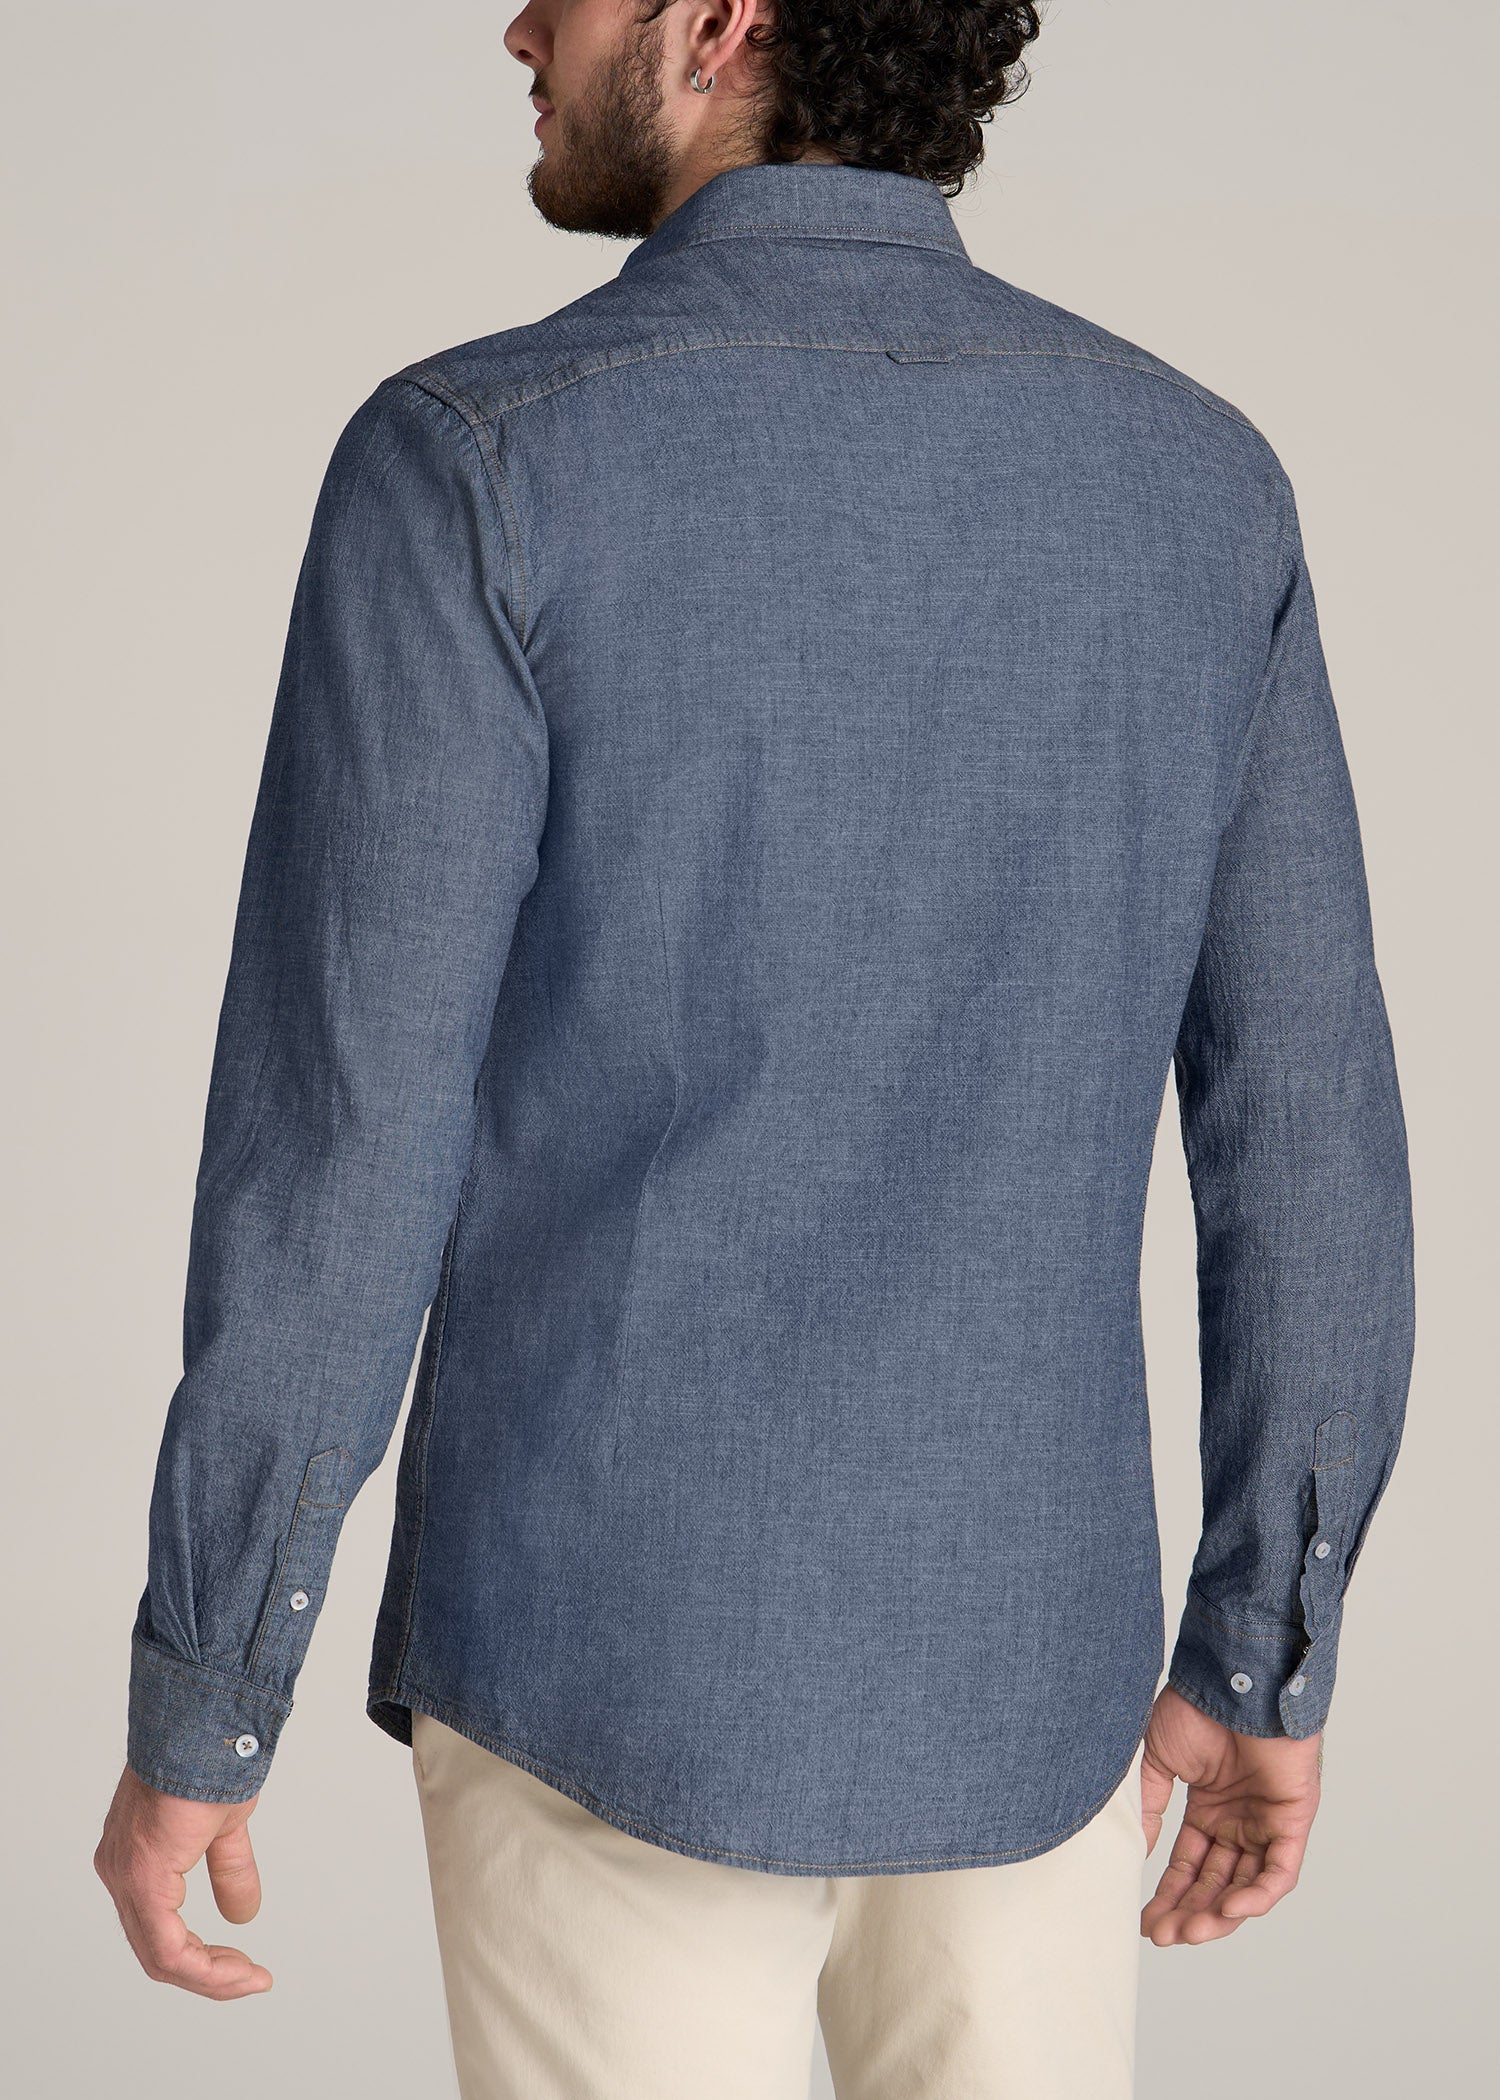 Chambray Button-Down Shirt for Tall Men in Medium Chambray